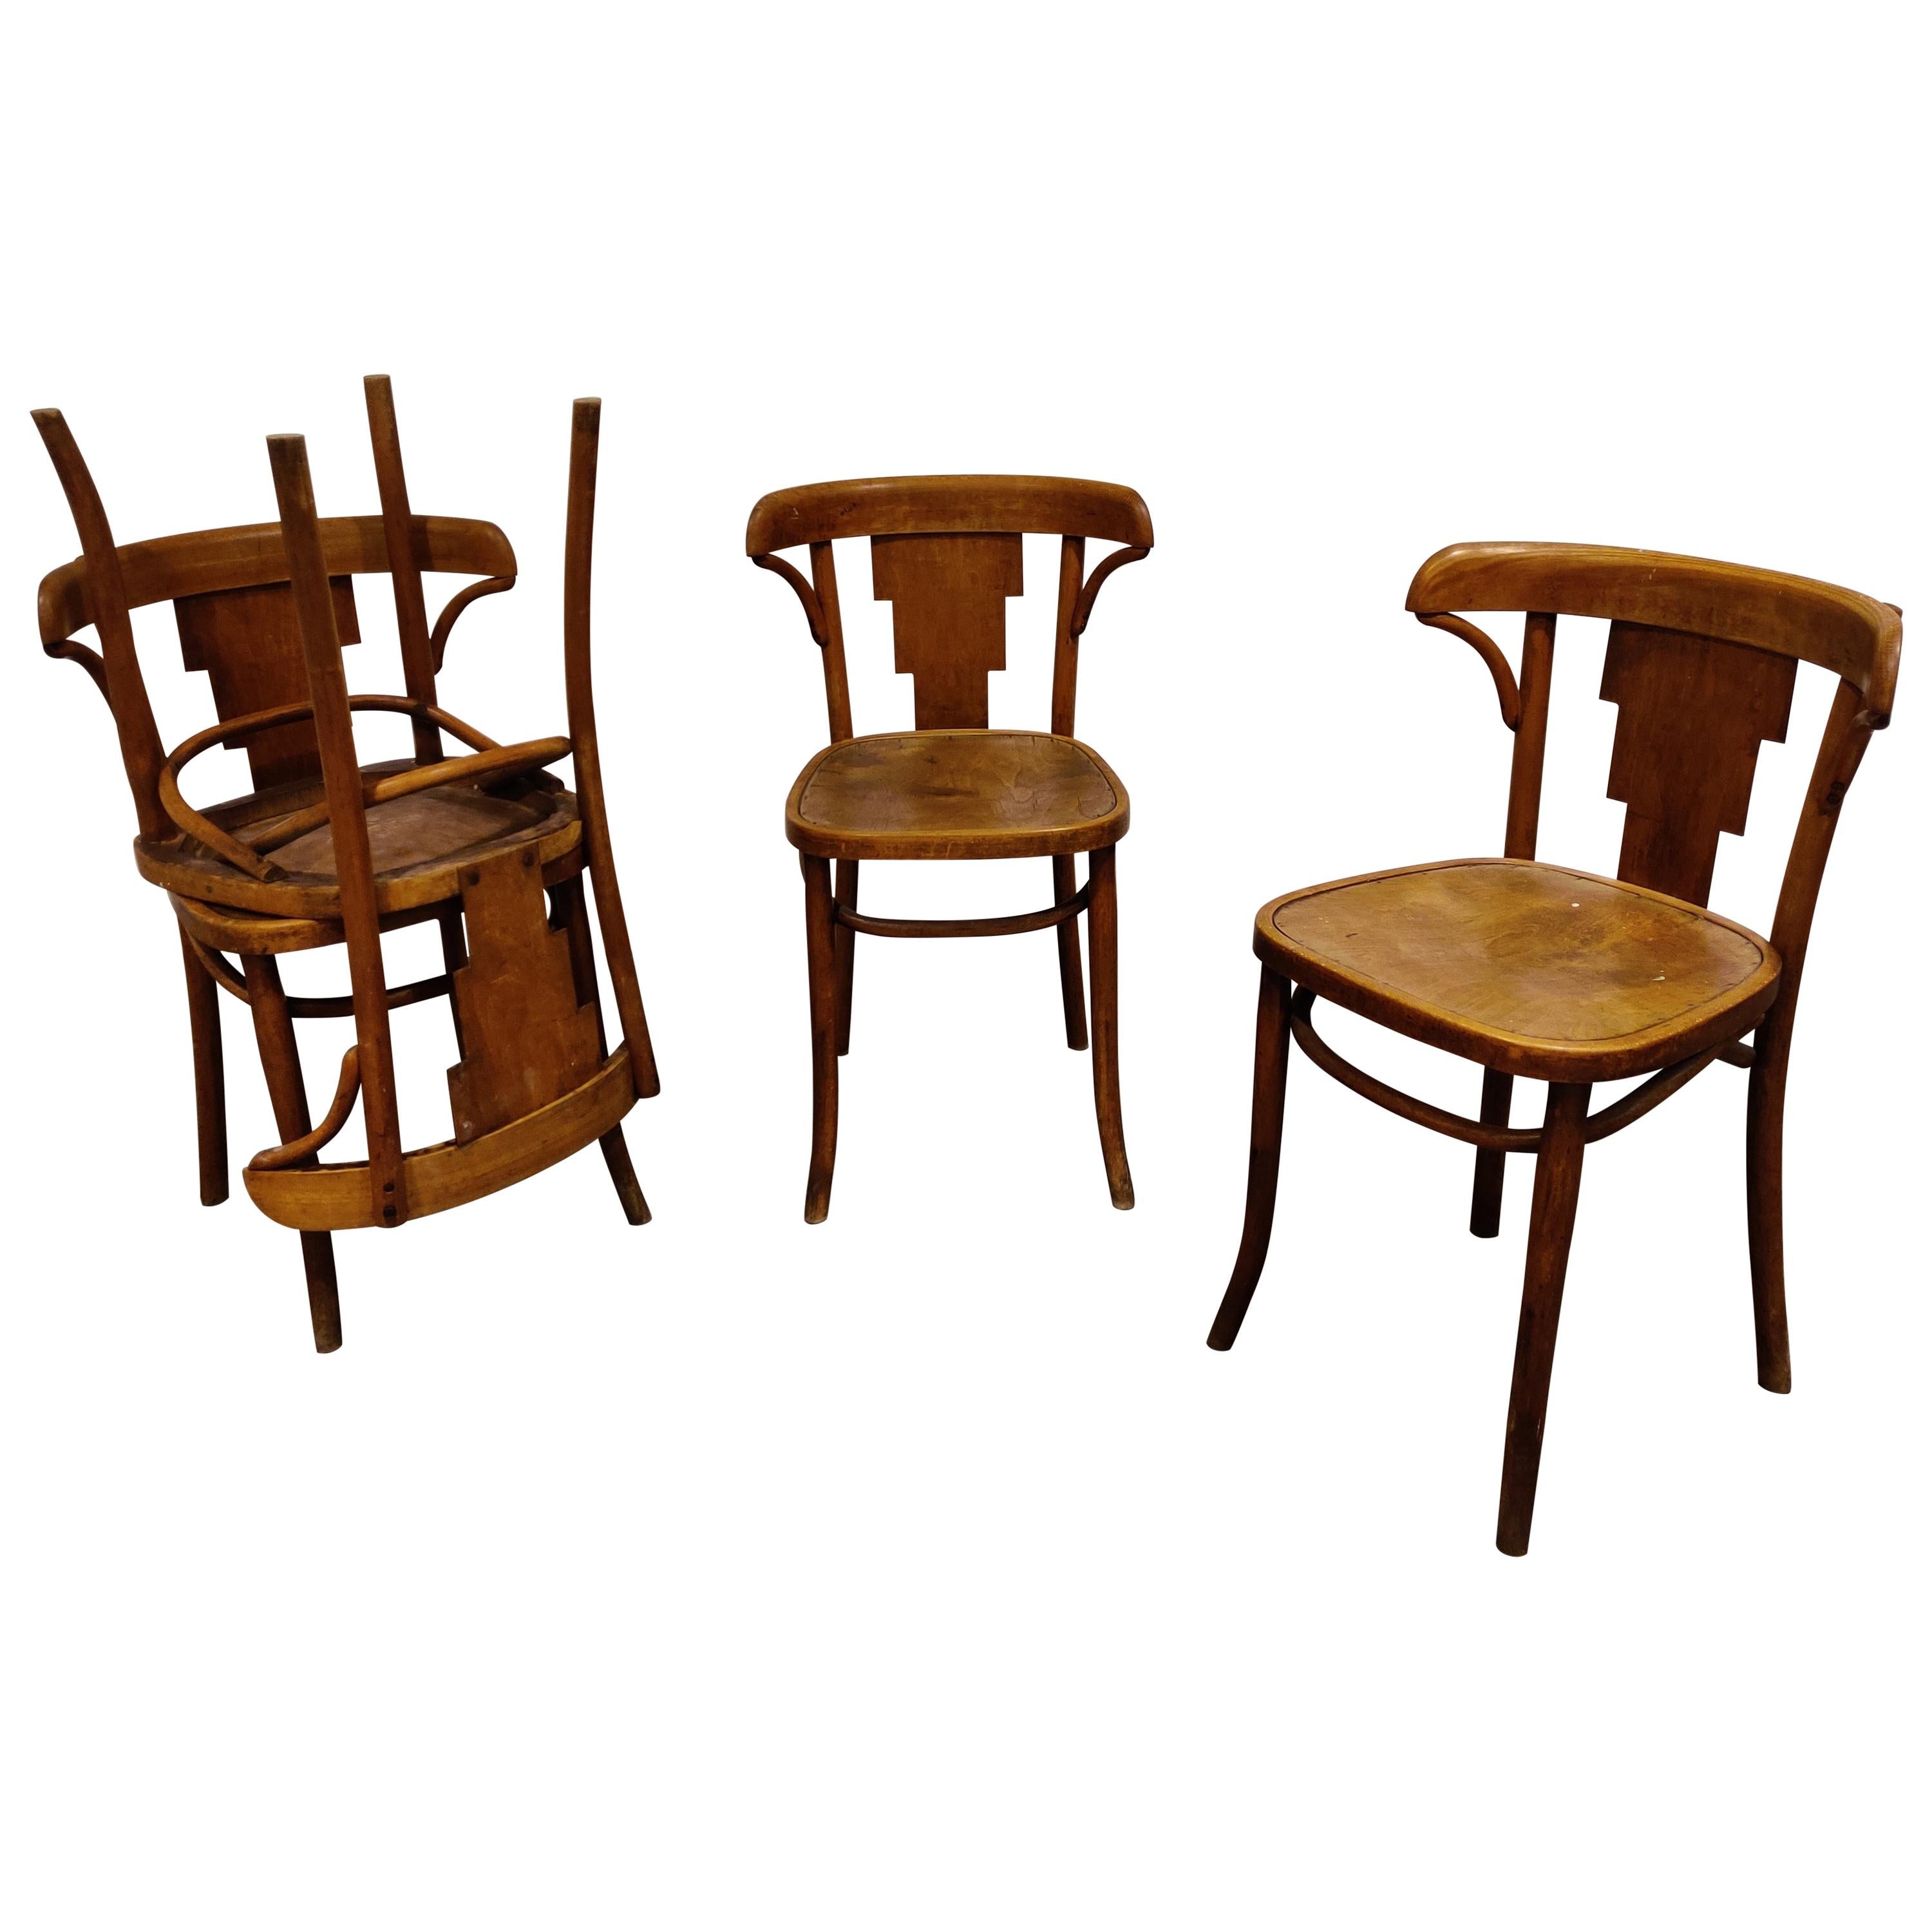 Set of 4 Vintage Bistro Chairs by Luterma, 1920s